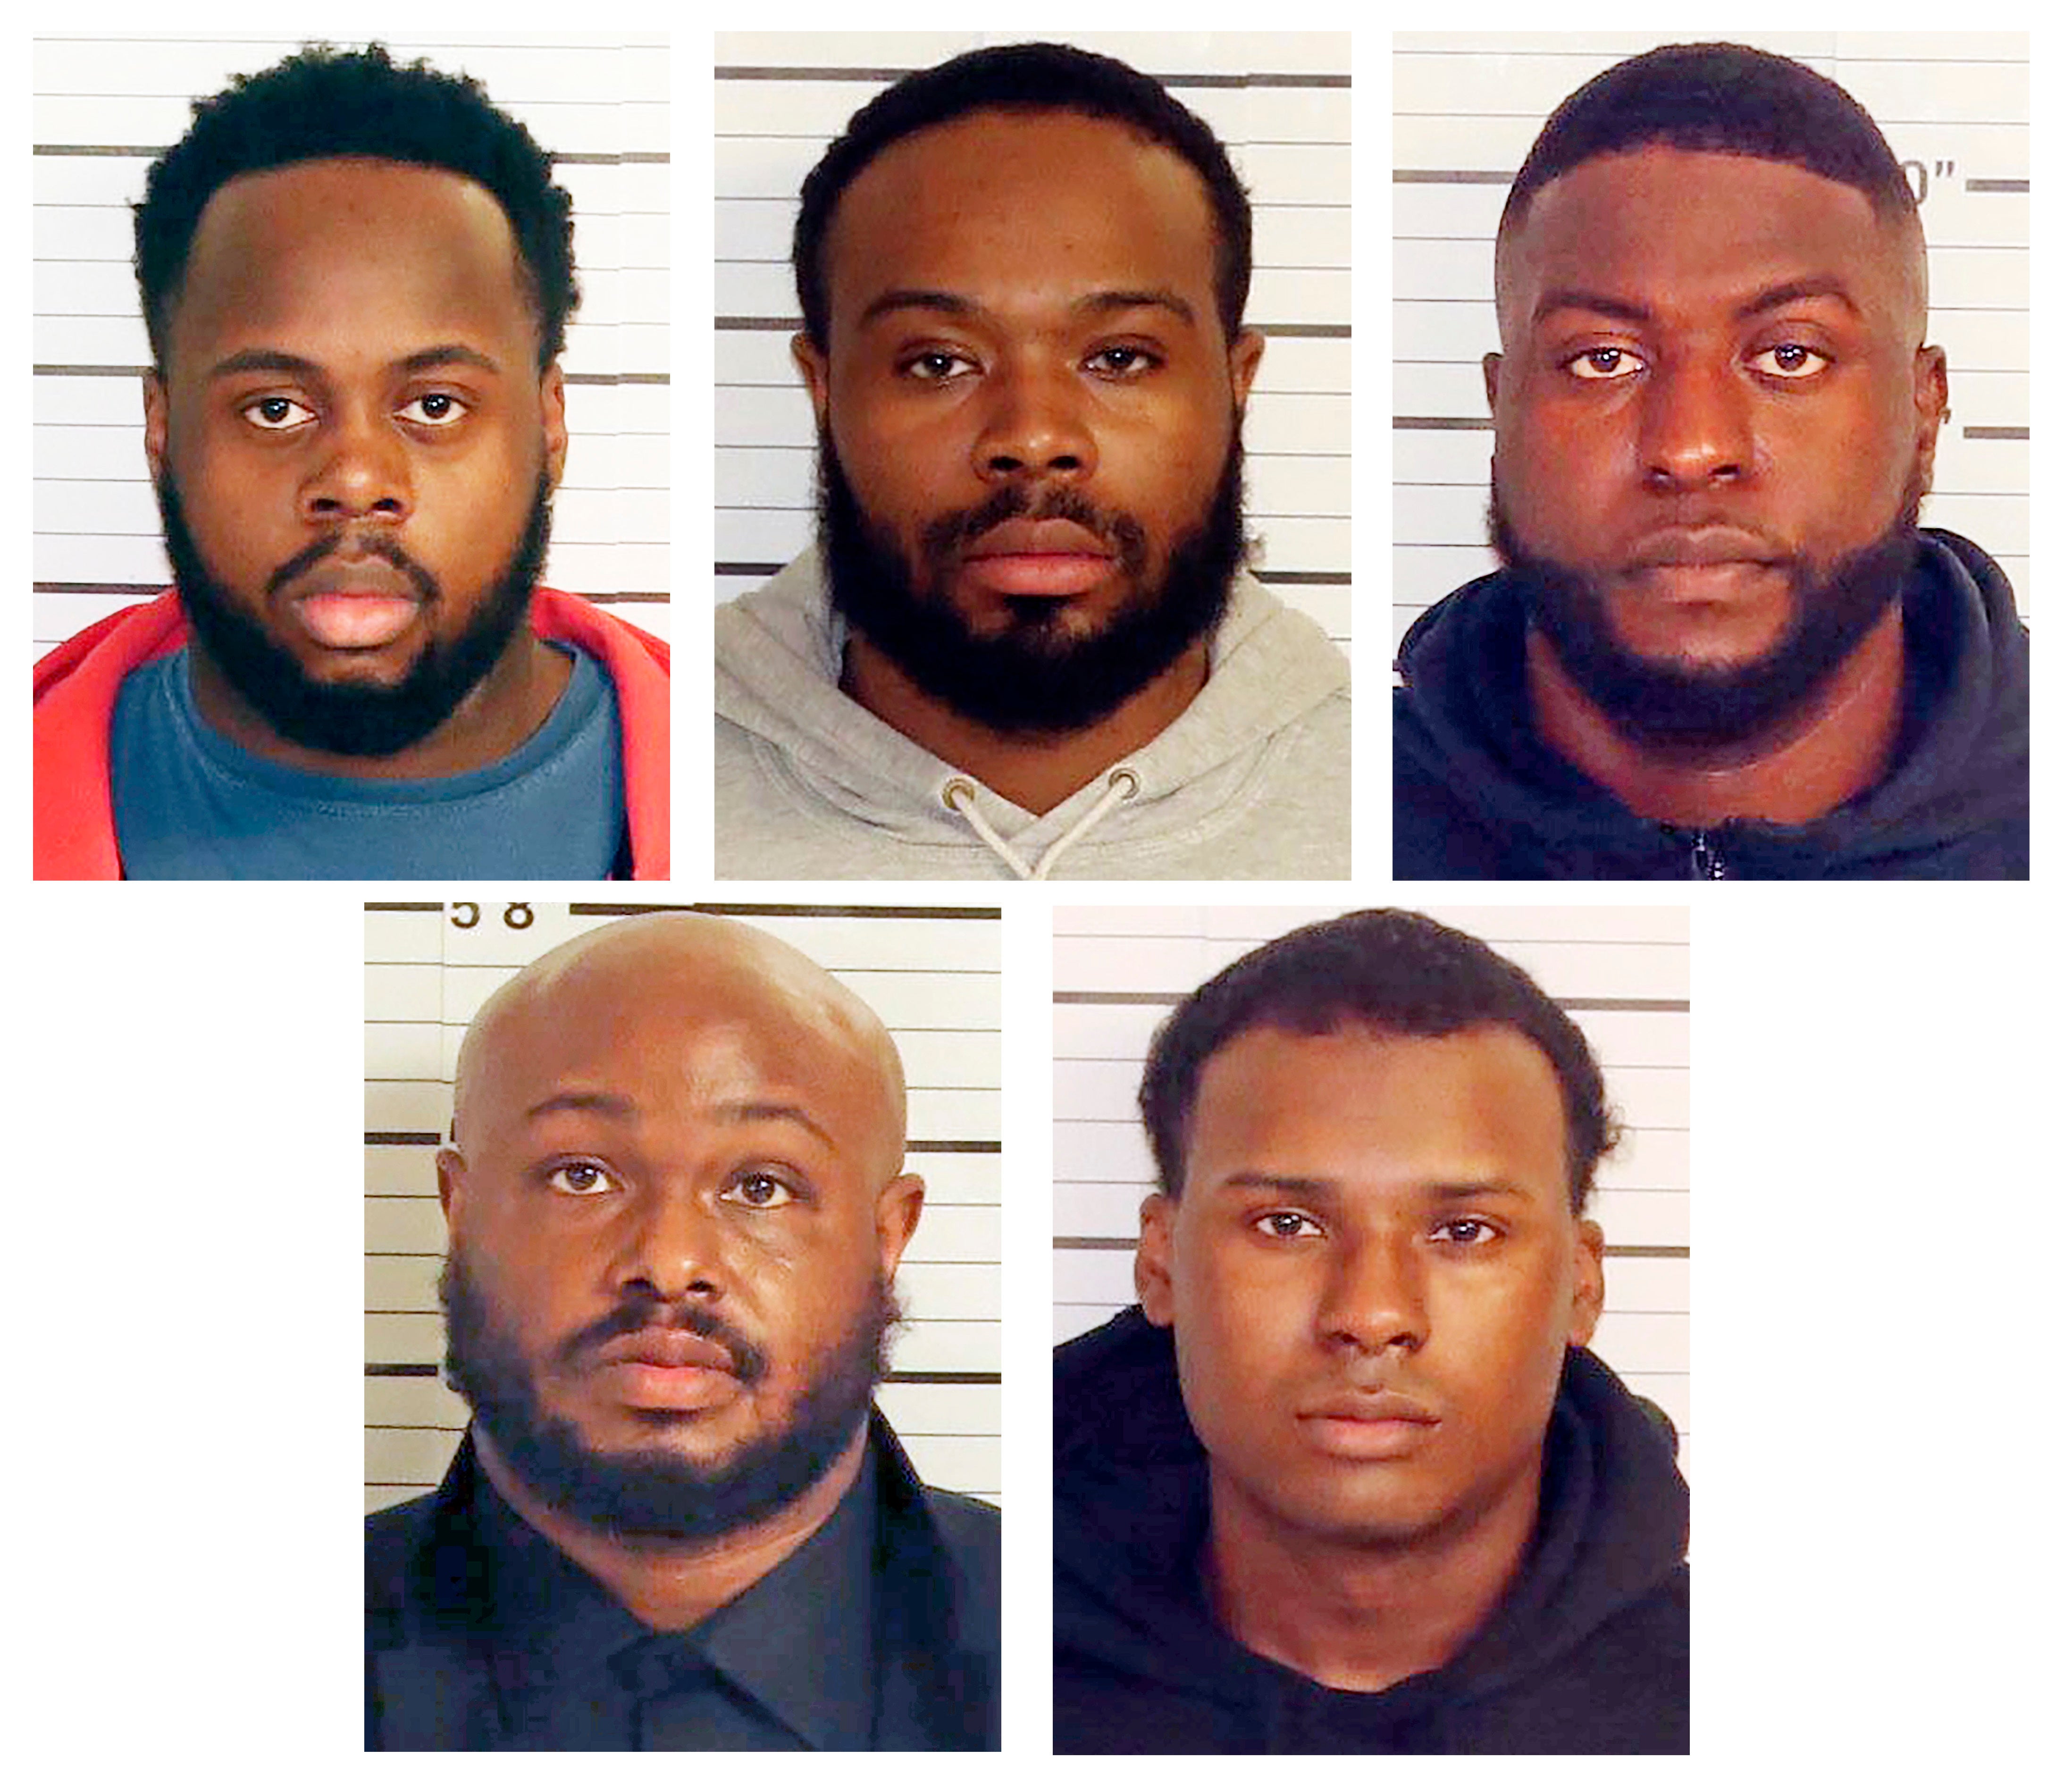 This combo of booking images provided by the Shelby County Sheriff's Office shows, from top row from left, Tadarrius Bean, Demetrius Haley, Emmitt Martin III, bottom row from left, Desmond Mills, Jr. and Justin Smith